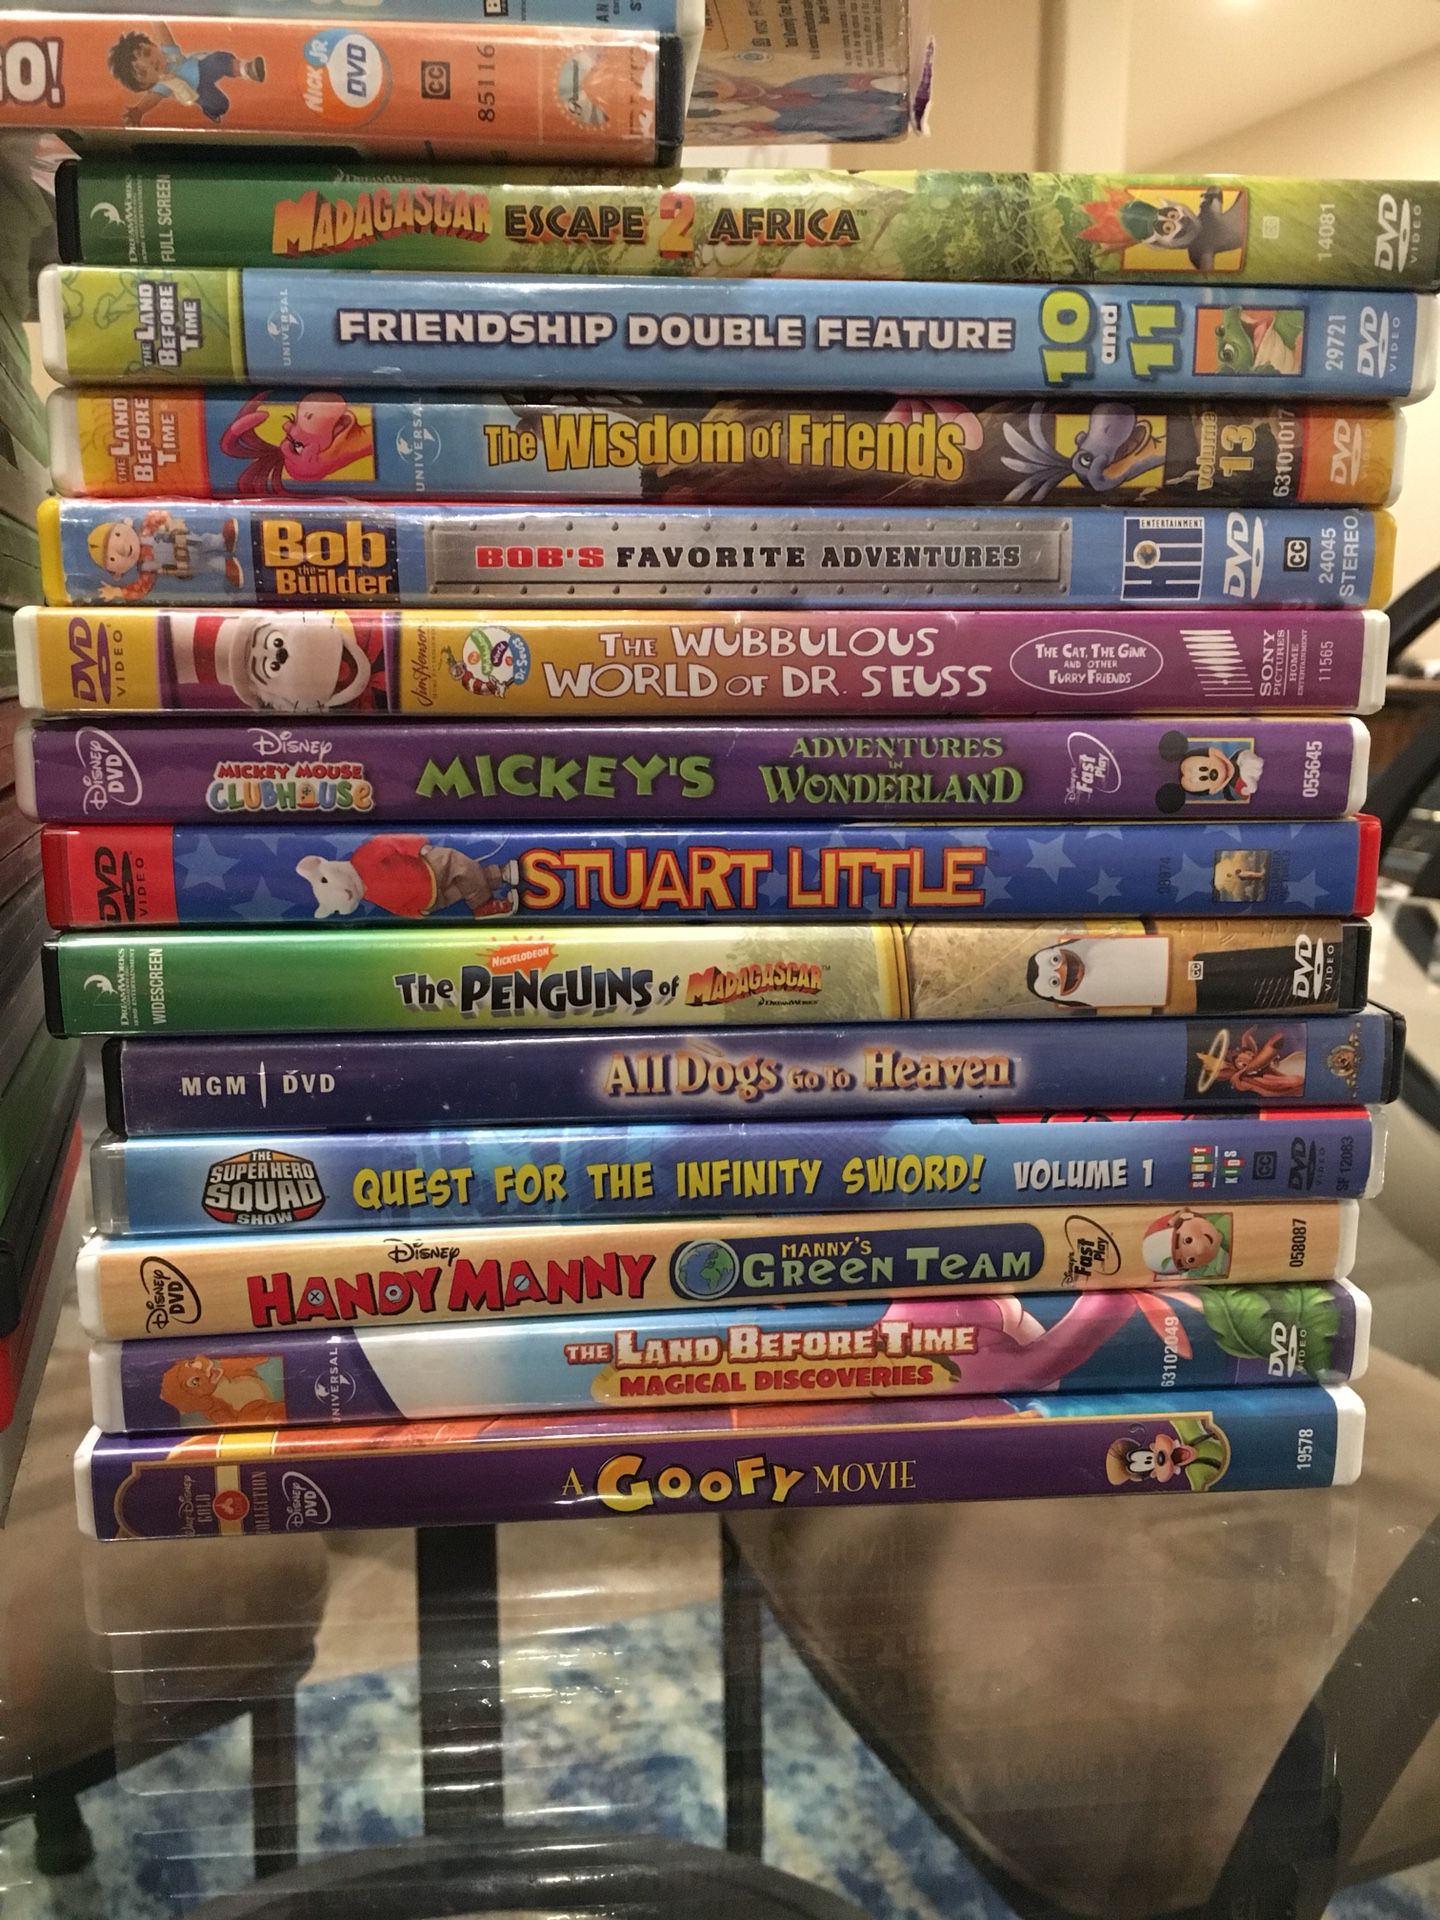 Mickey Mouse Clubhouse DVD's for Sale in Wildomar, CA - OfferUp